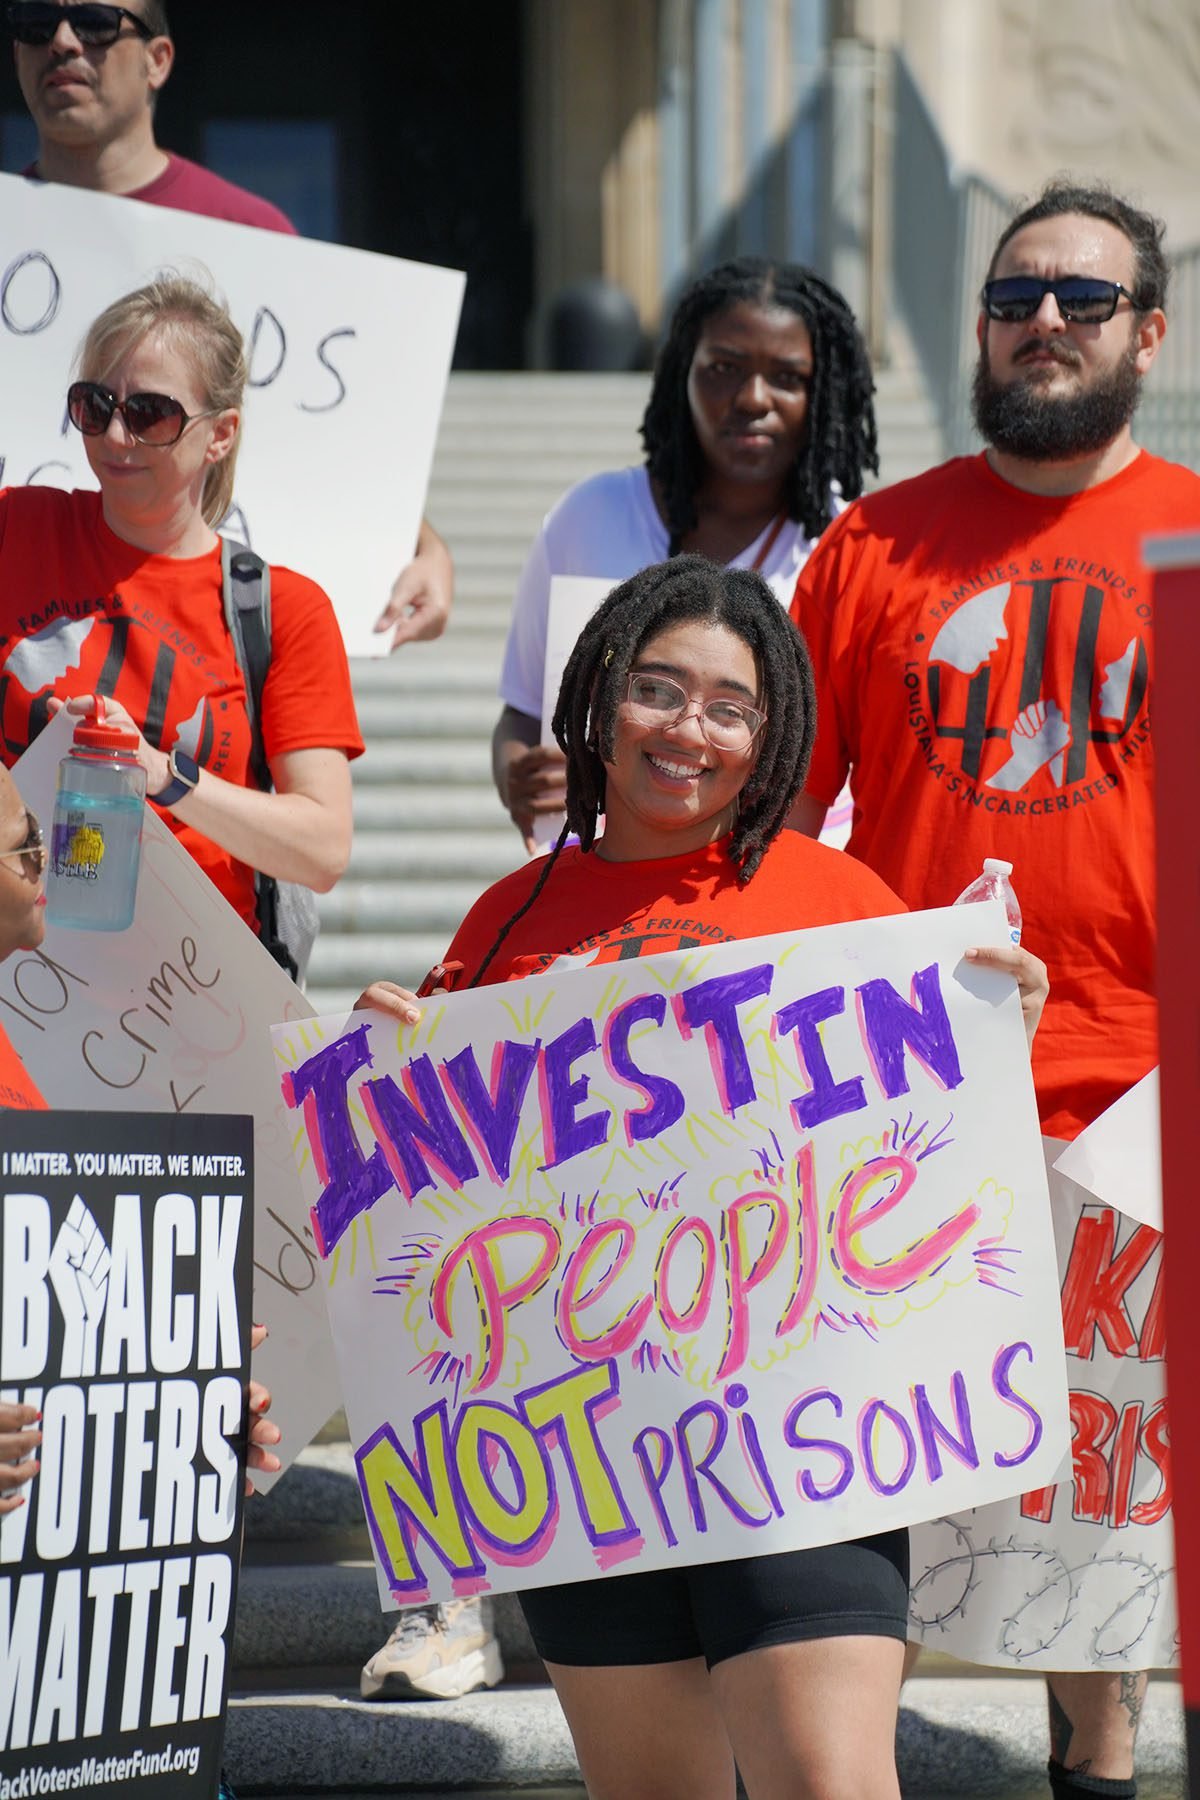 Cameron Dumas holds a sign that reads "Invest in people, not prisons" at a rally advocating for the closing of youth prisons.